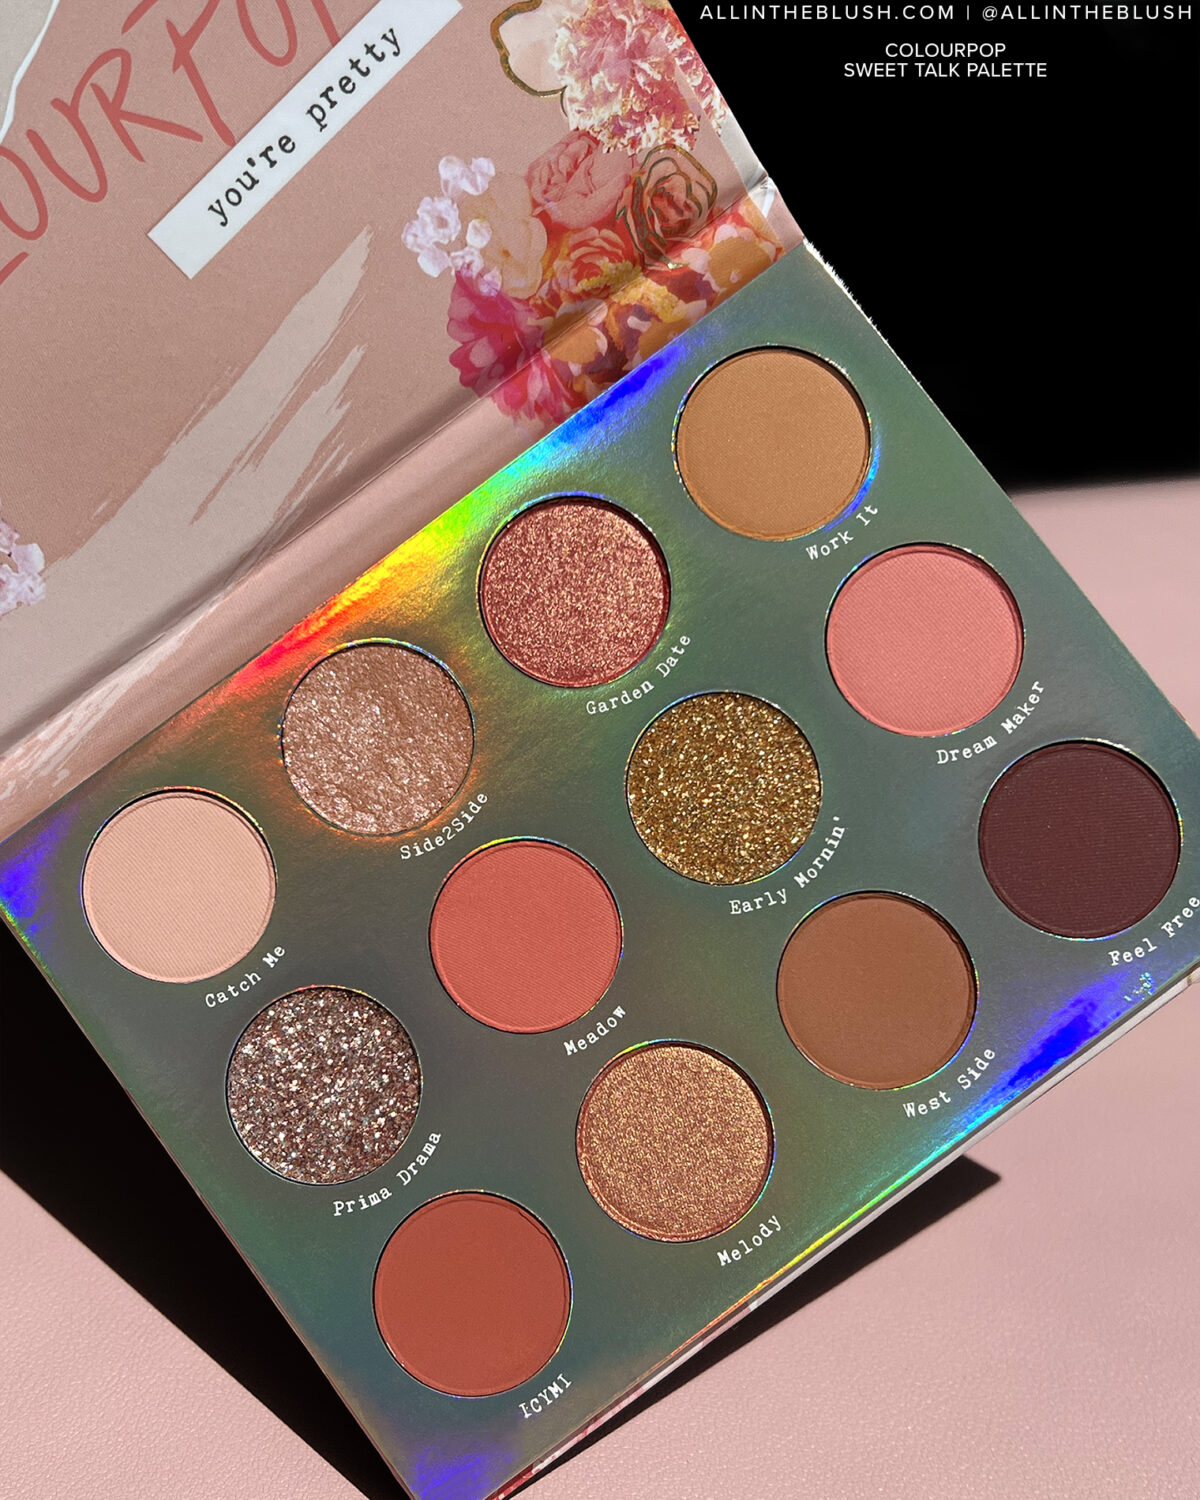 Reviewing ColourPop’s #1 Best-Selling Palette Ever – The Sweet Talk Eyeshadow Palette